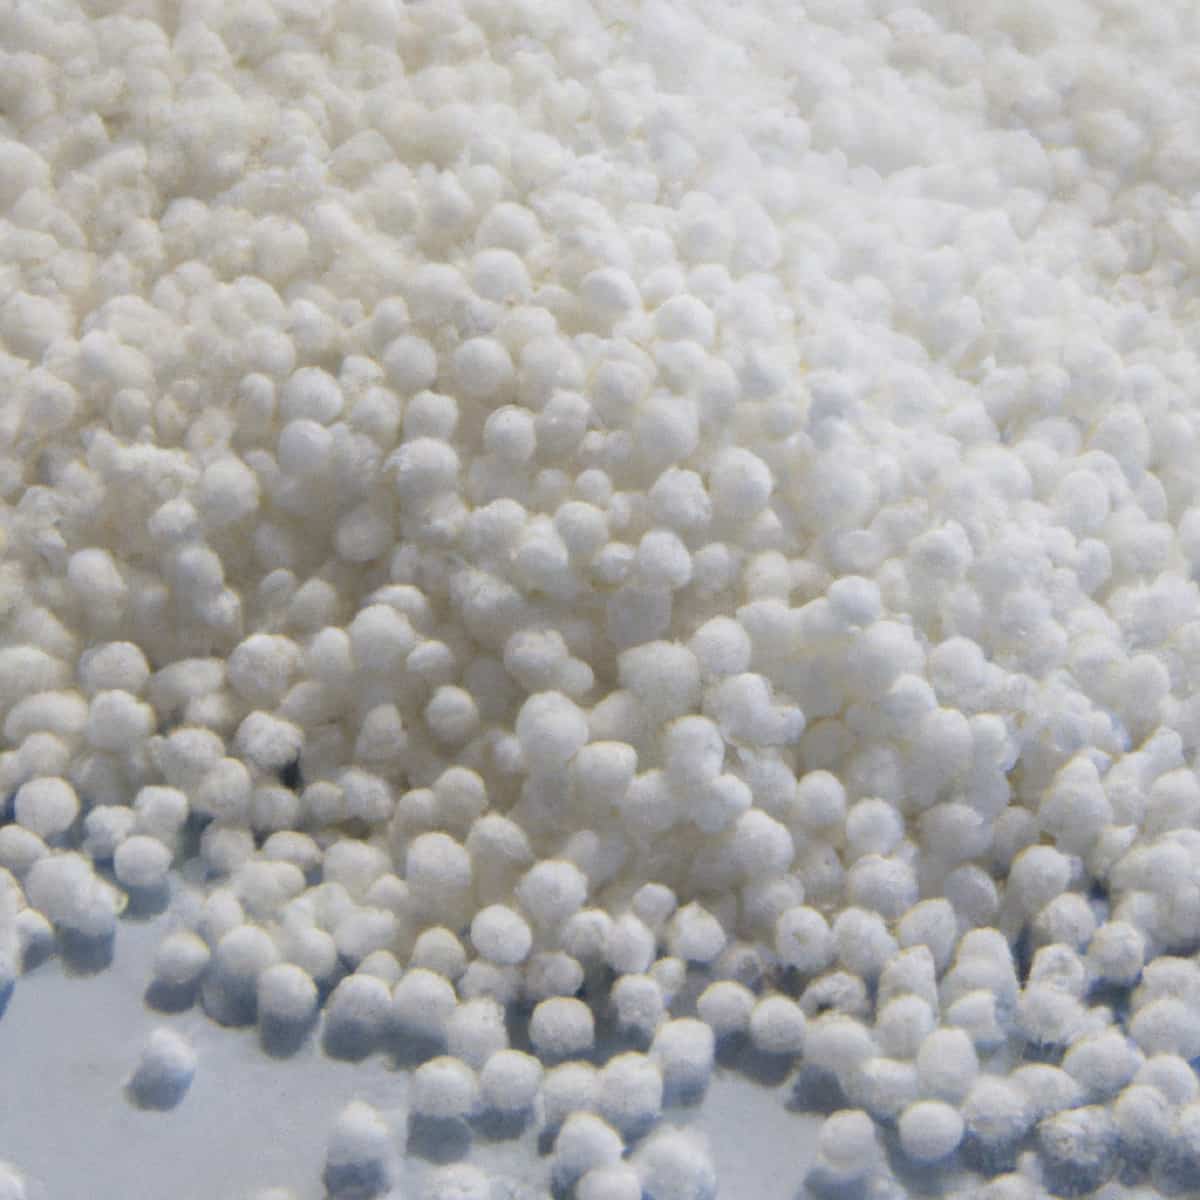 How to use urea correctly in fertilization?